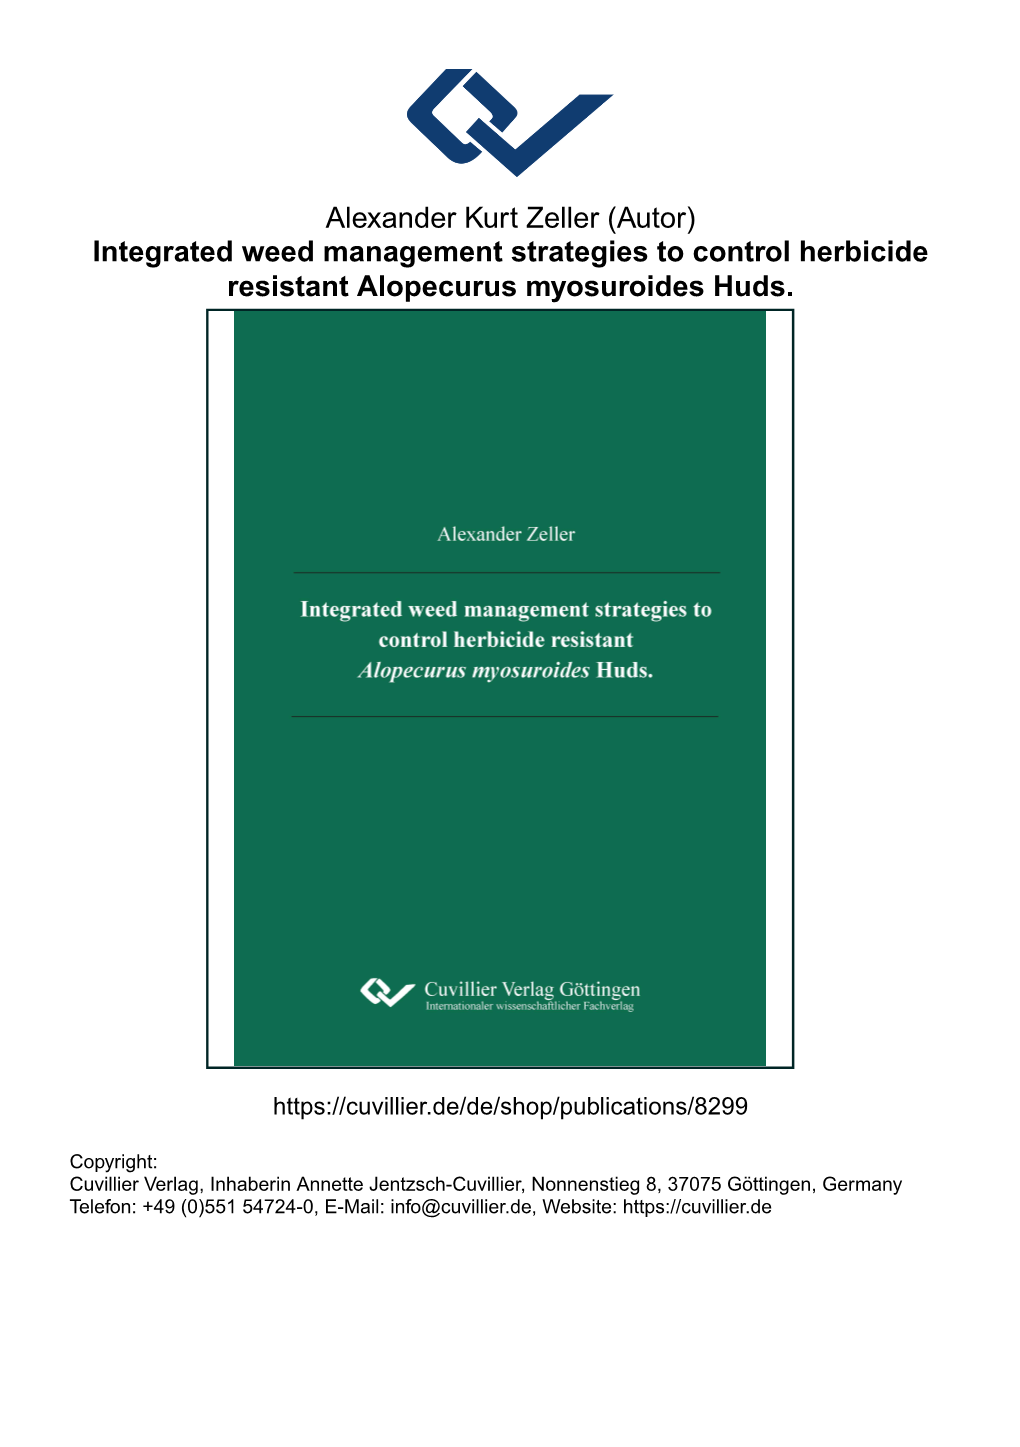 (Autor) Integrated Weed Management Strategies to Control Herbicide Resistant Alopecurus Myosuroides Huds